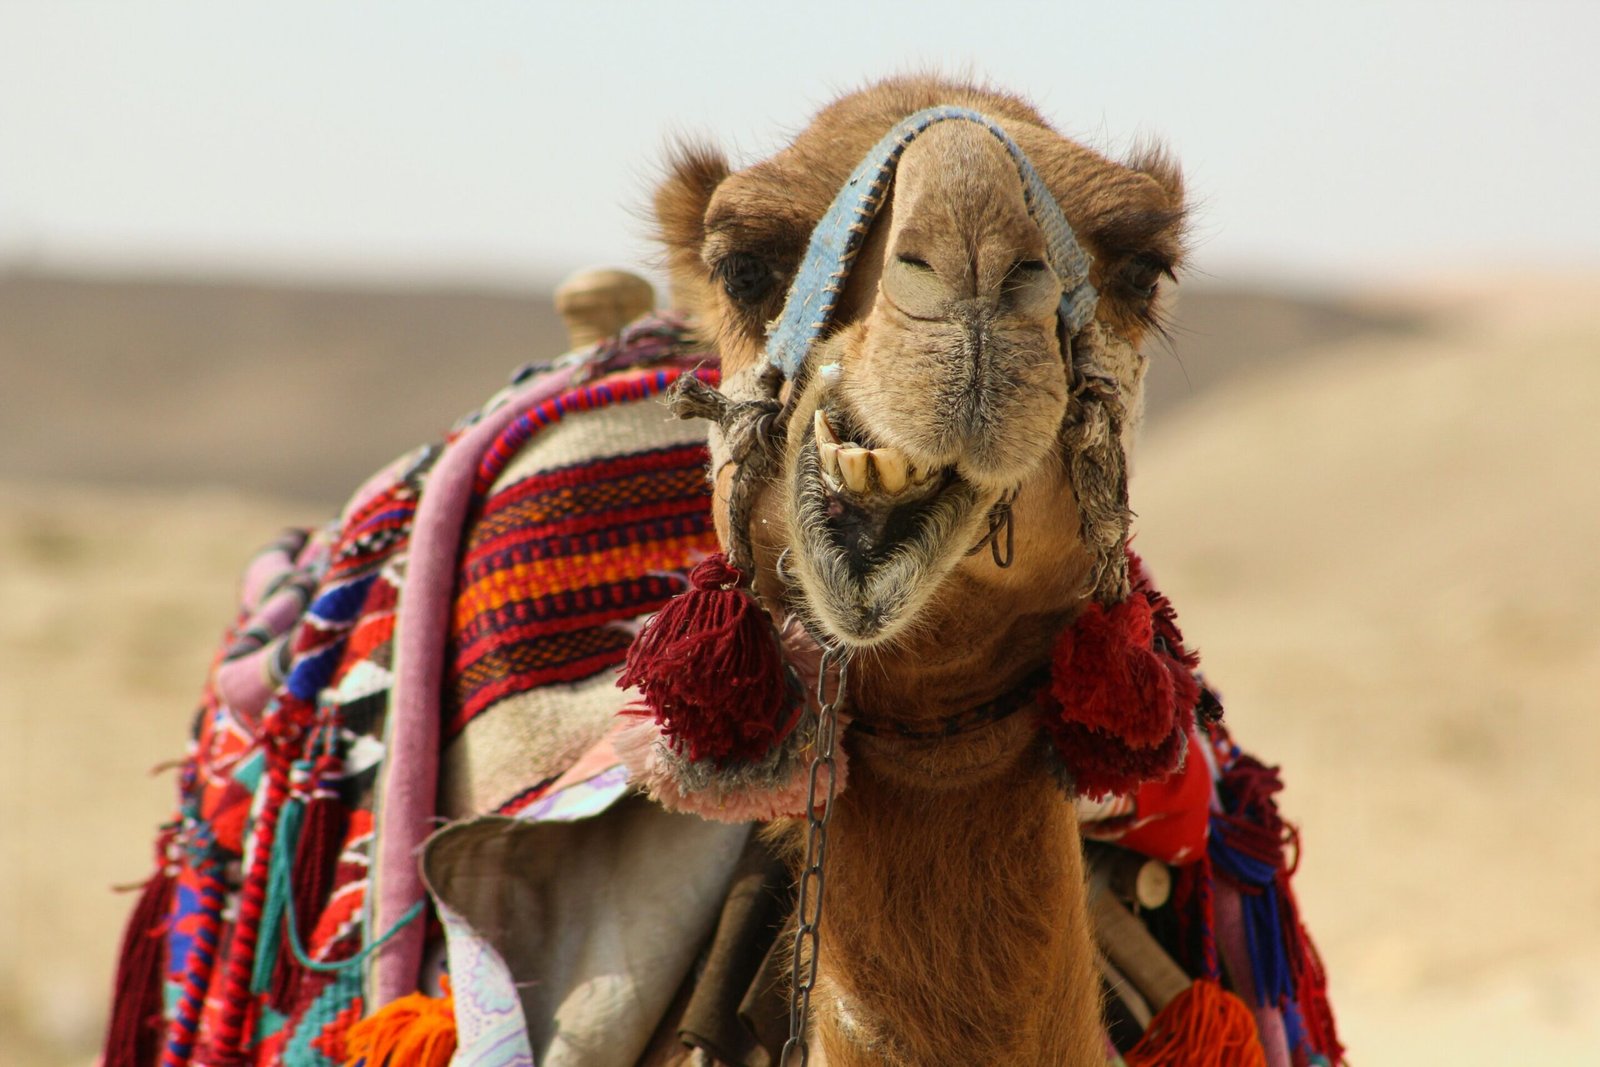 Drinking camel milk can lead to significant reduction in cholesterol levels among diabetics